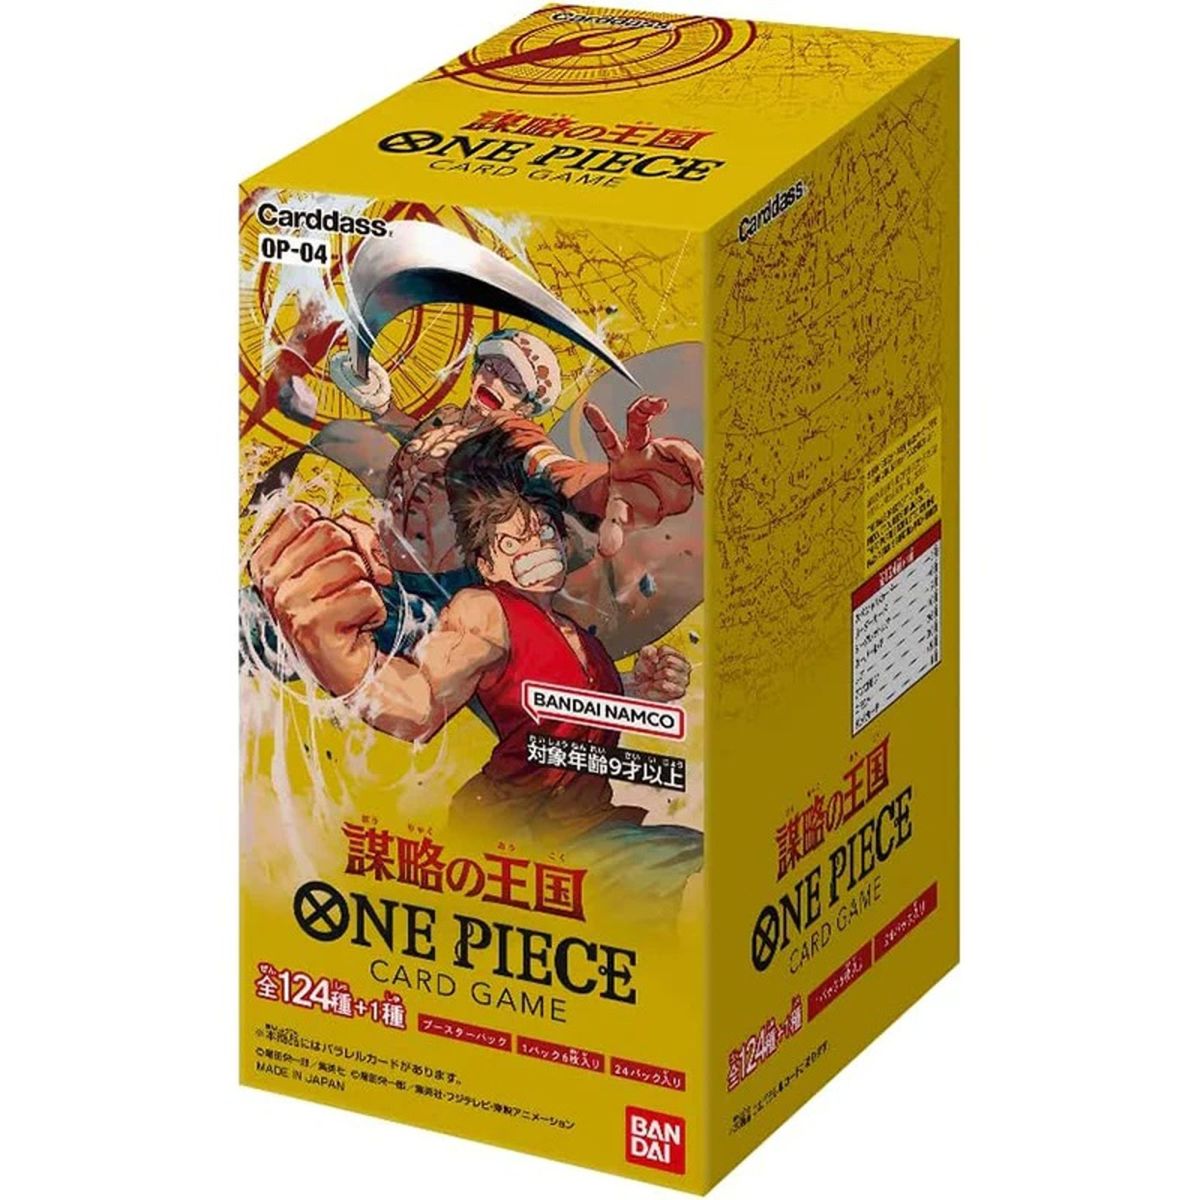 One Piece CG - Display - Box of 24 Boosters - Kingdom of Intrigue - OP-04 - JP